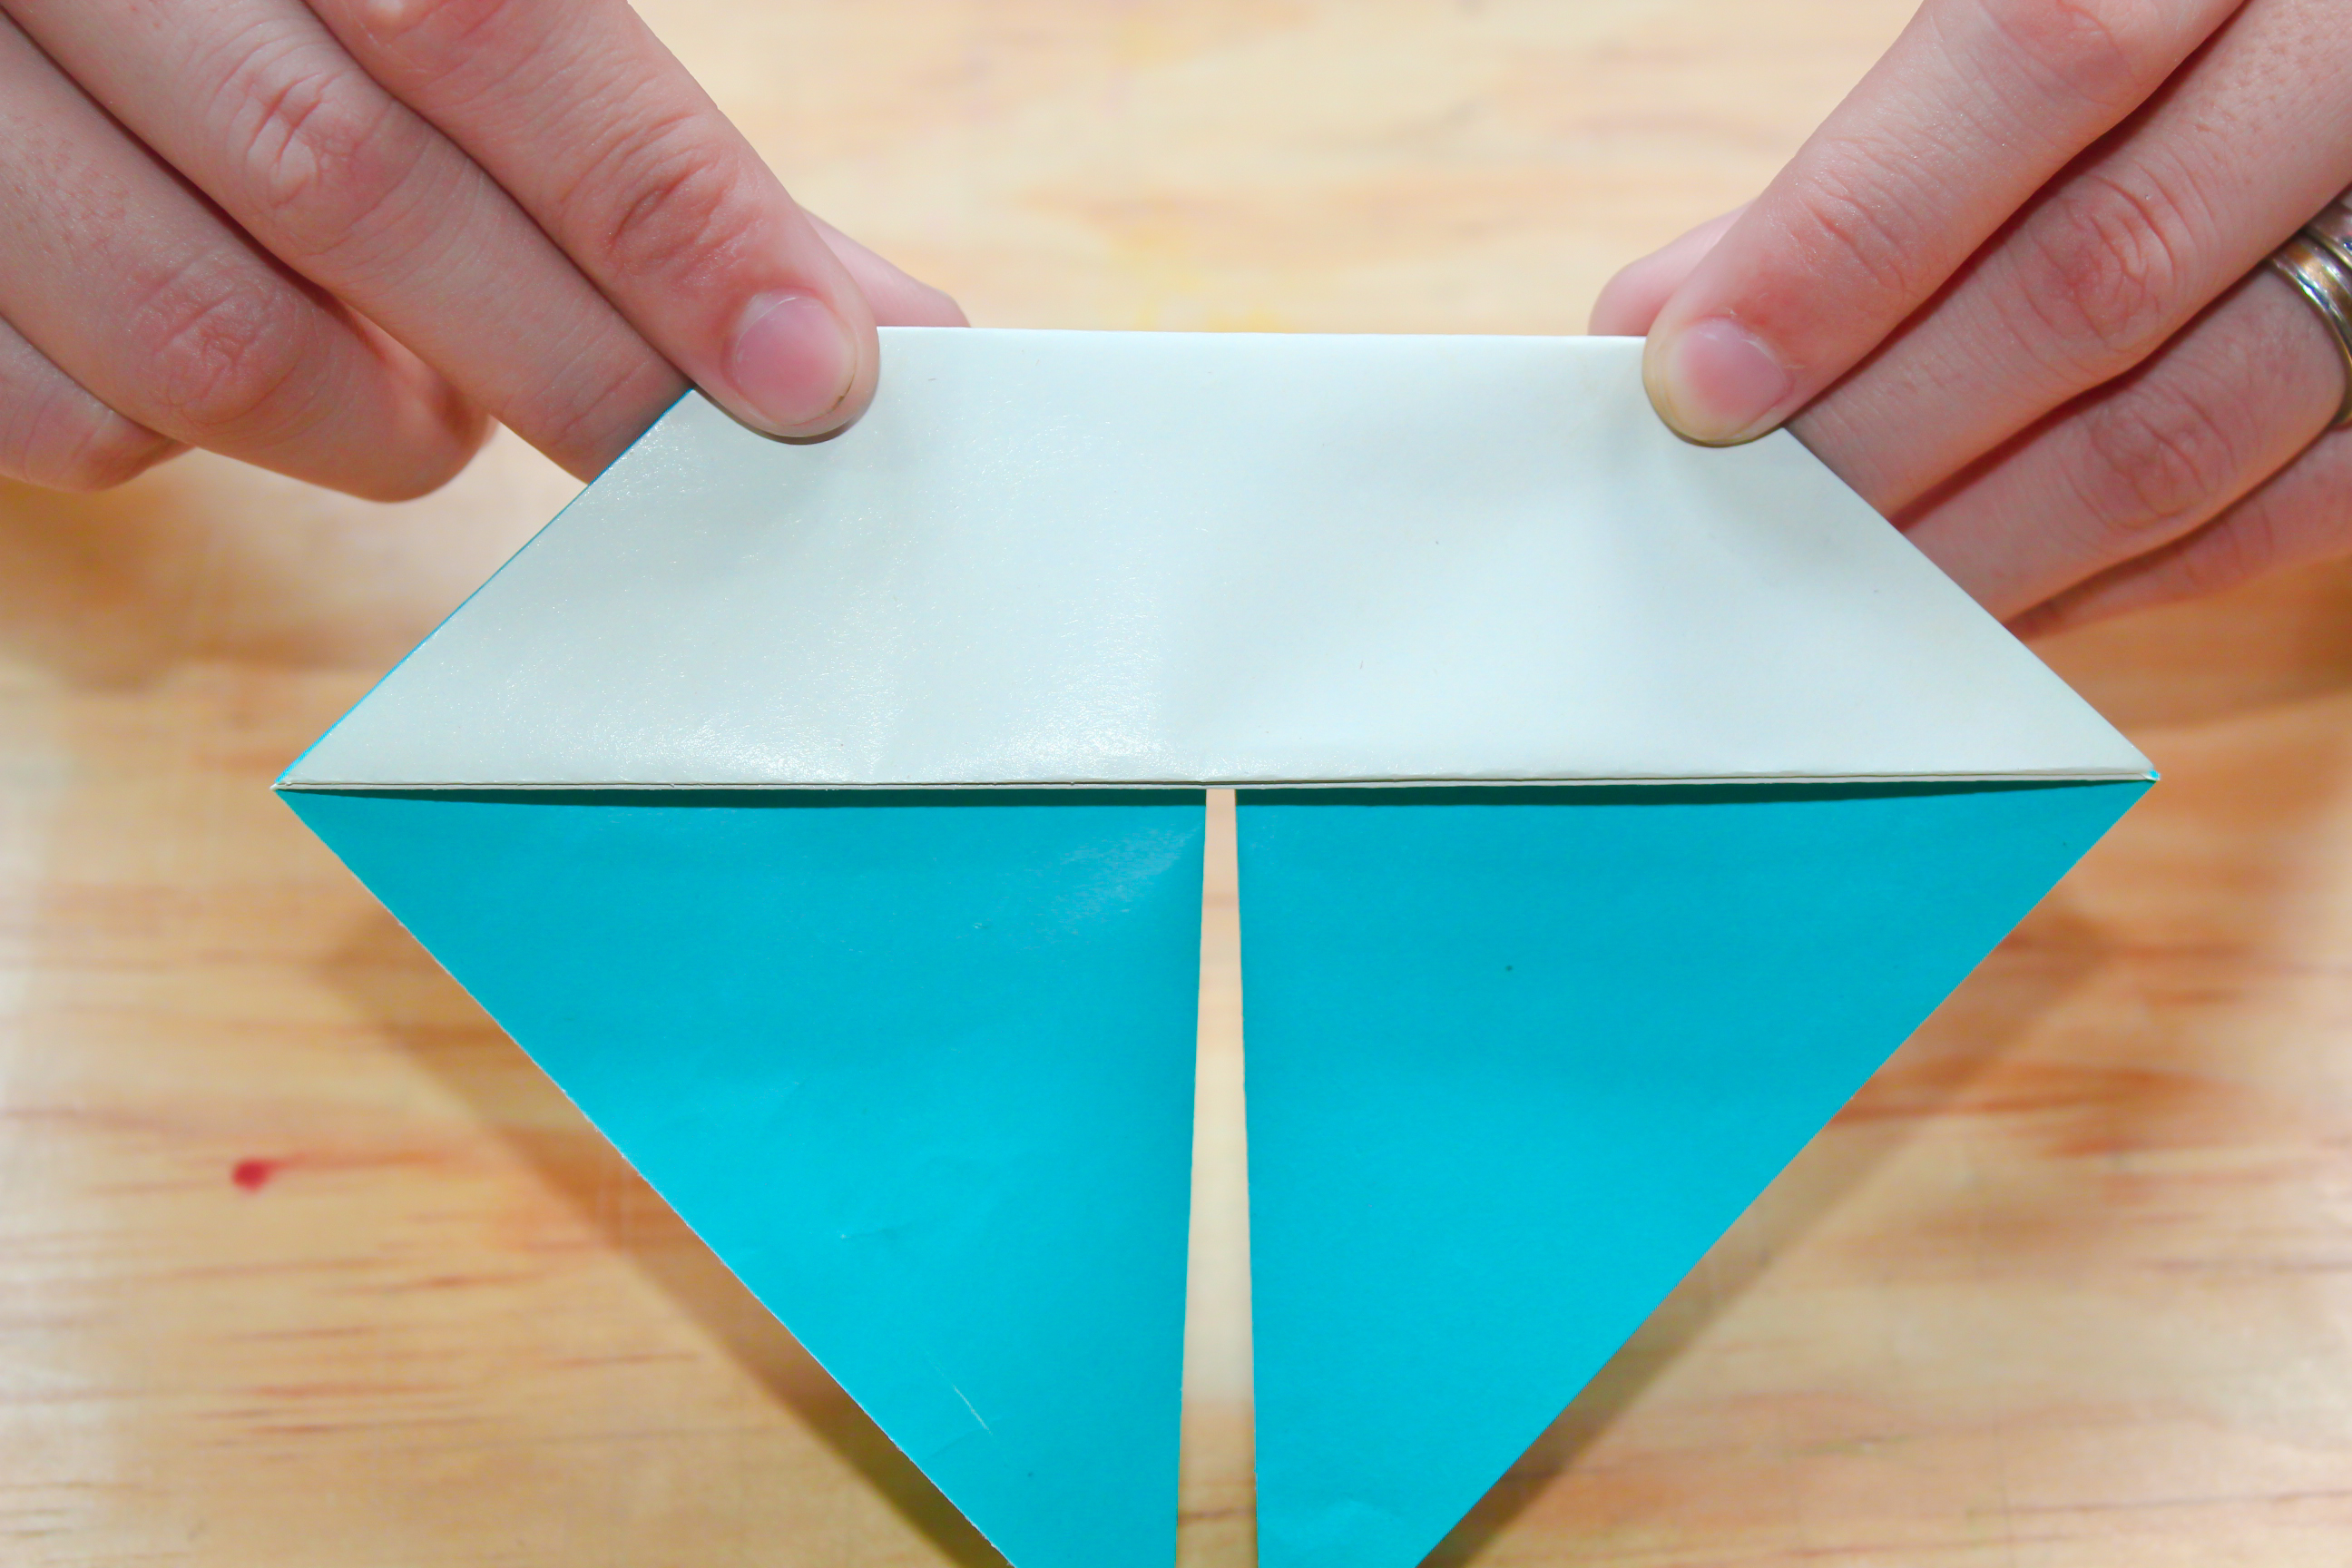 How To Make An Origami How To Make An Origami Sailboat 9 Steps With Pictures Wikihow